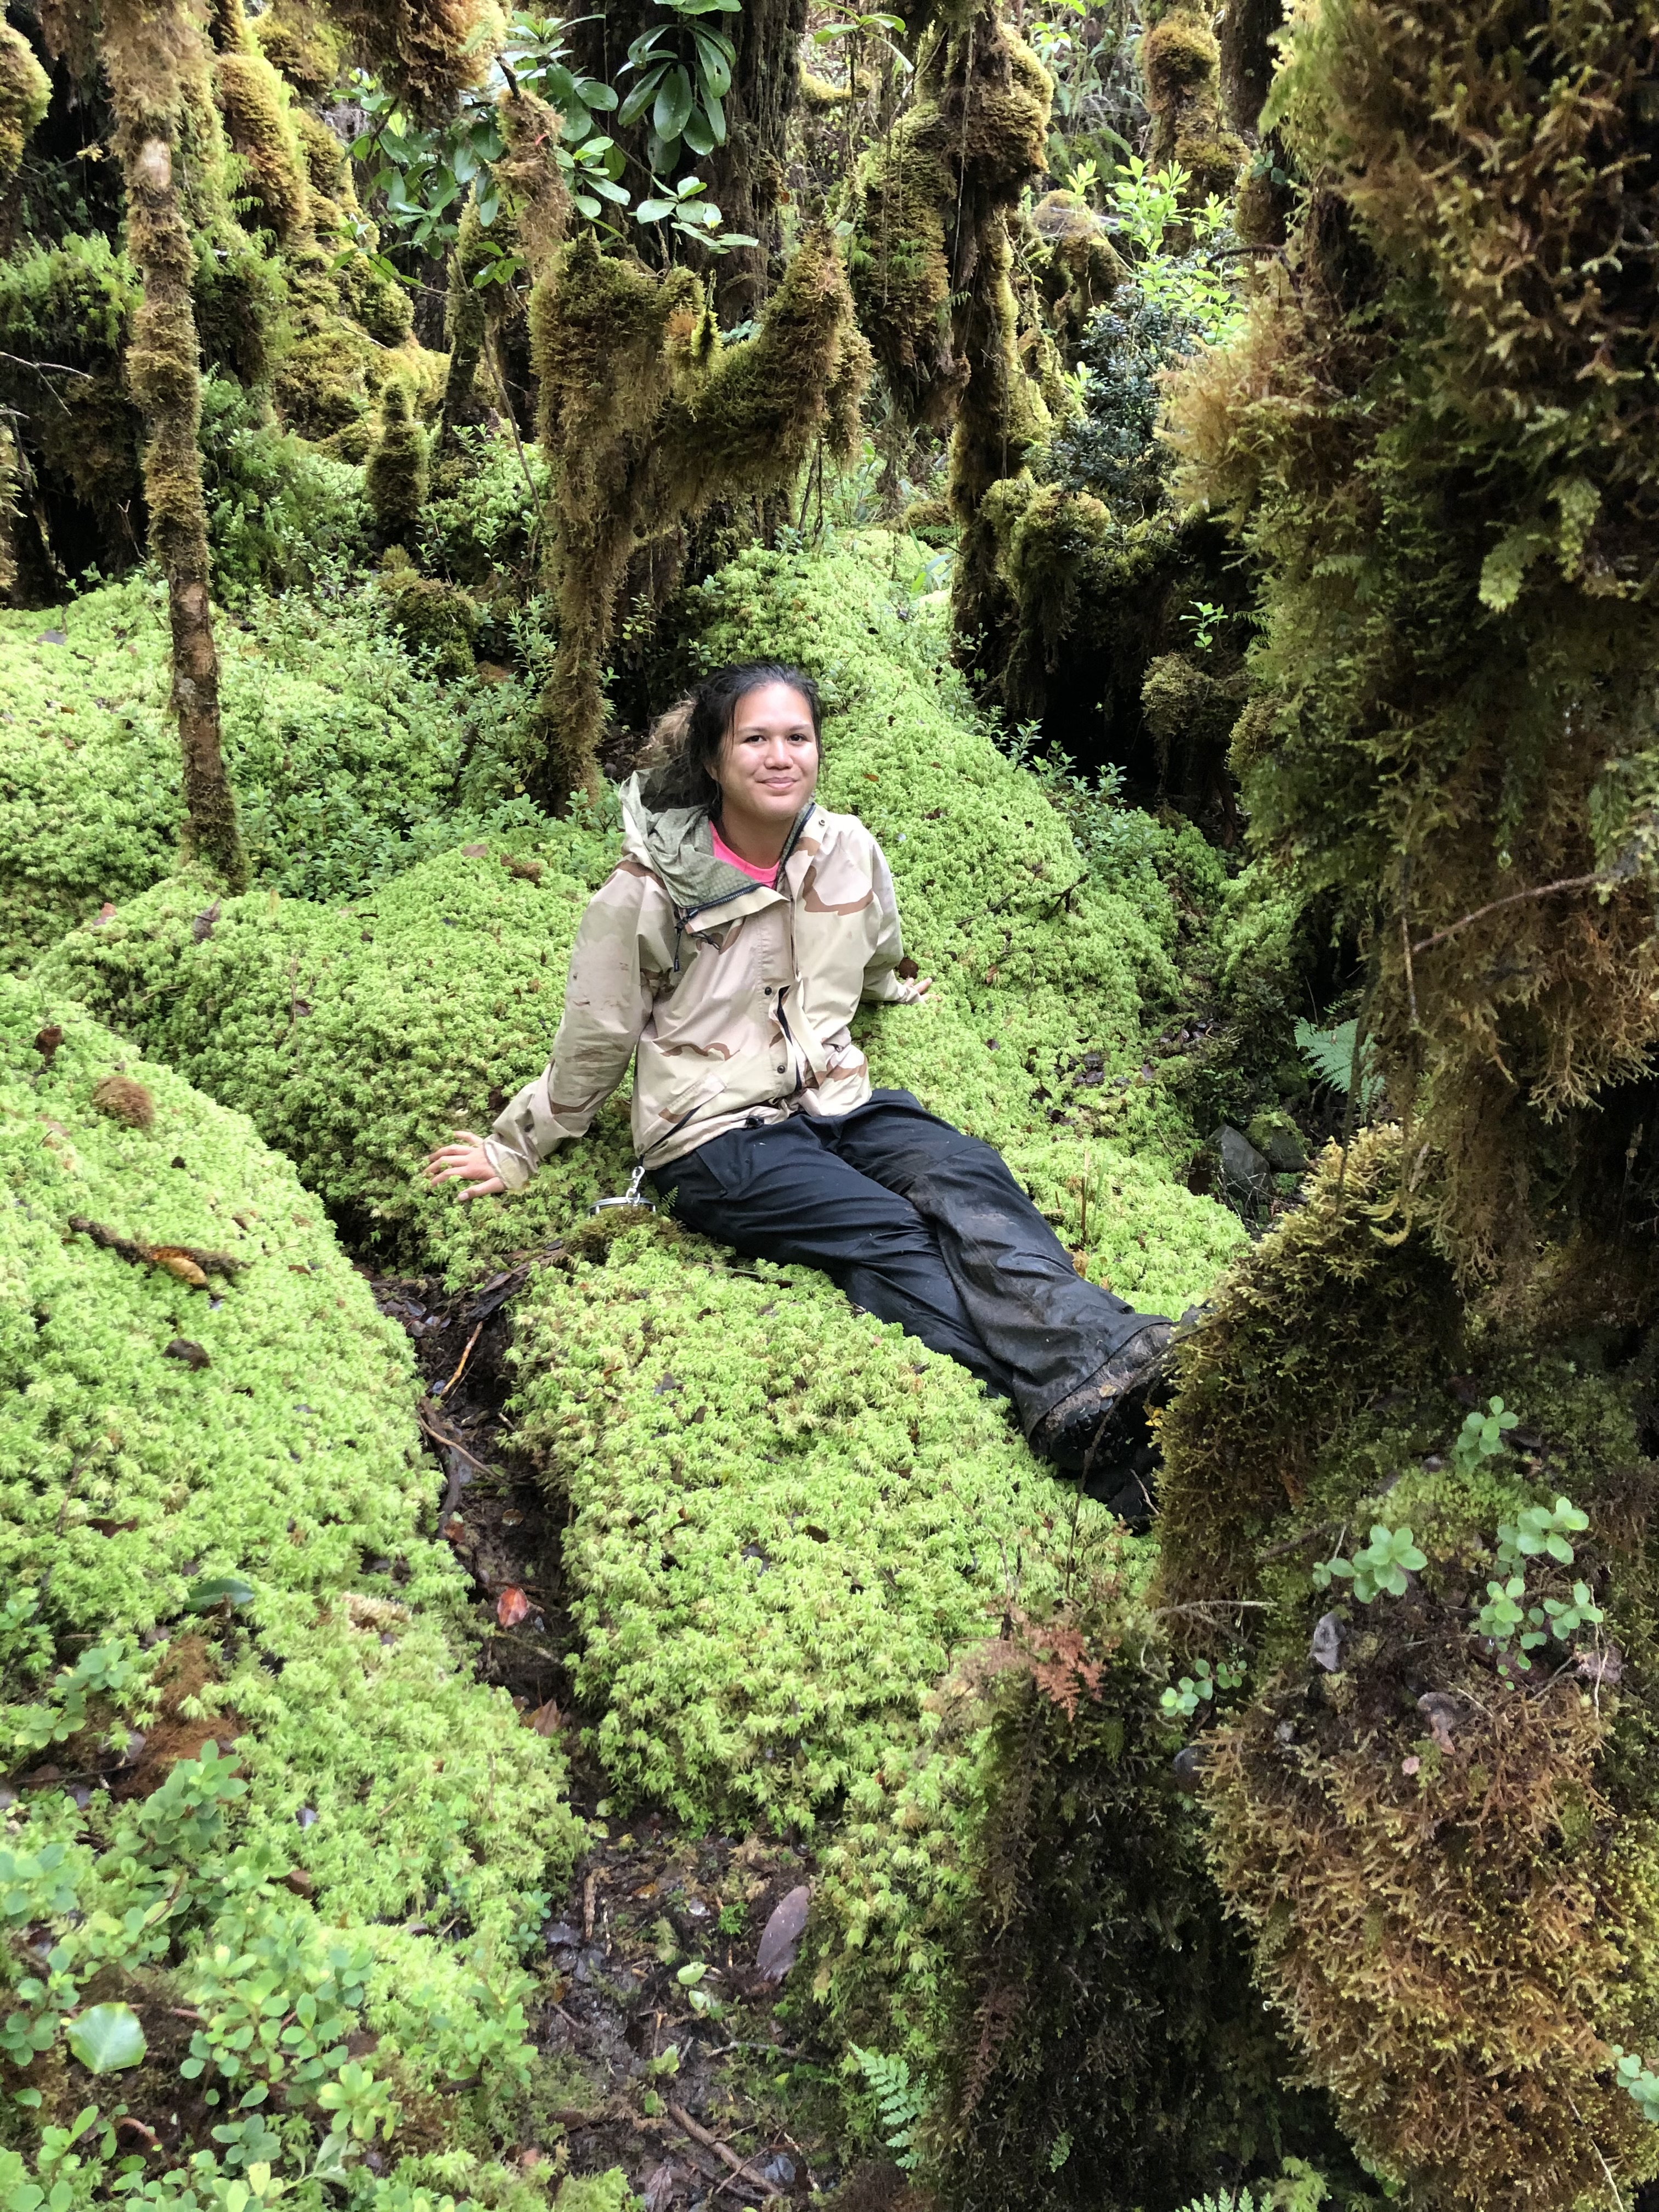 Kalena sits on a bed of moss in a native Hawaiian forest